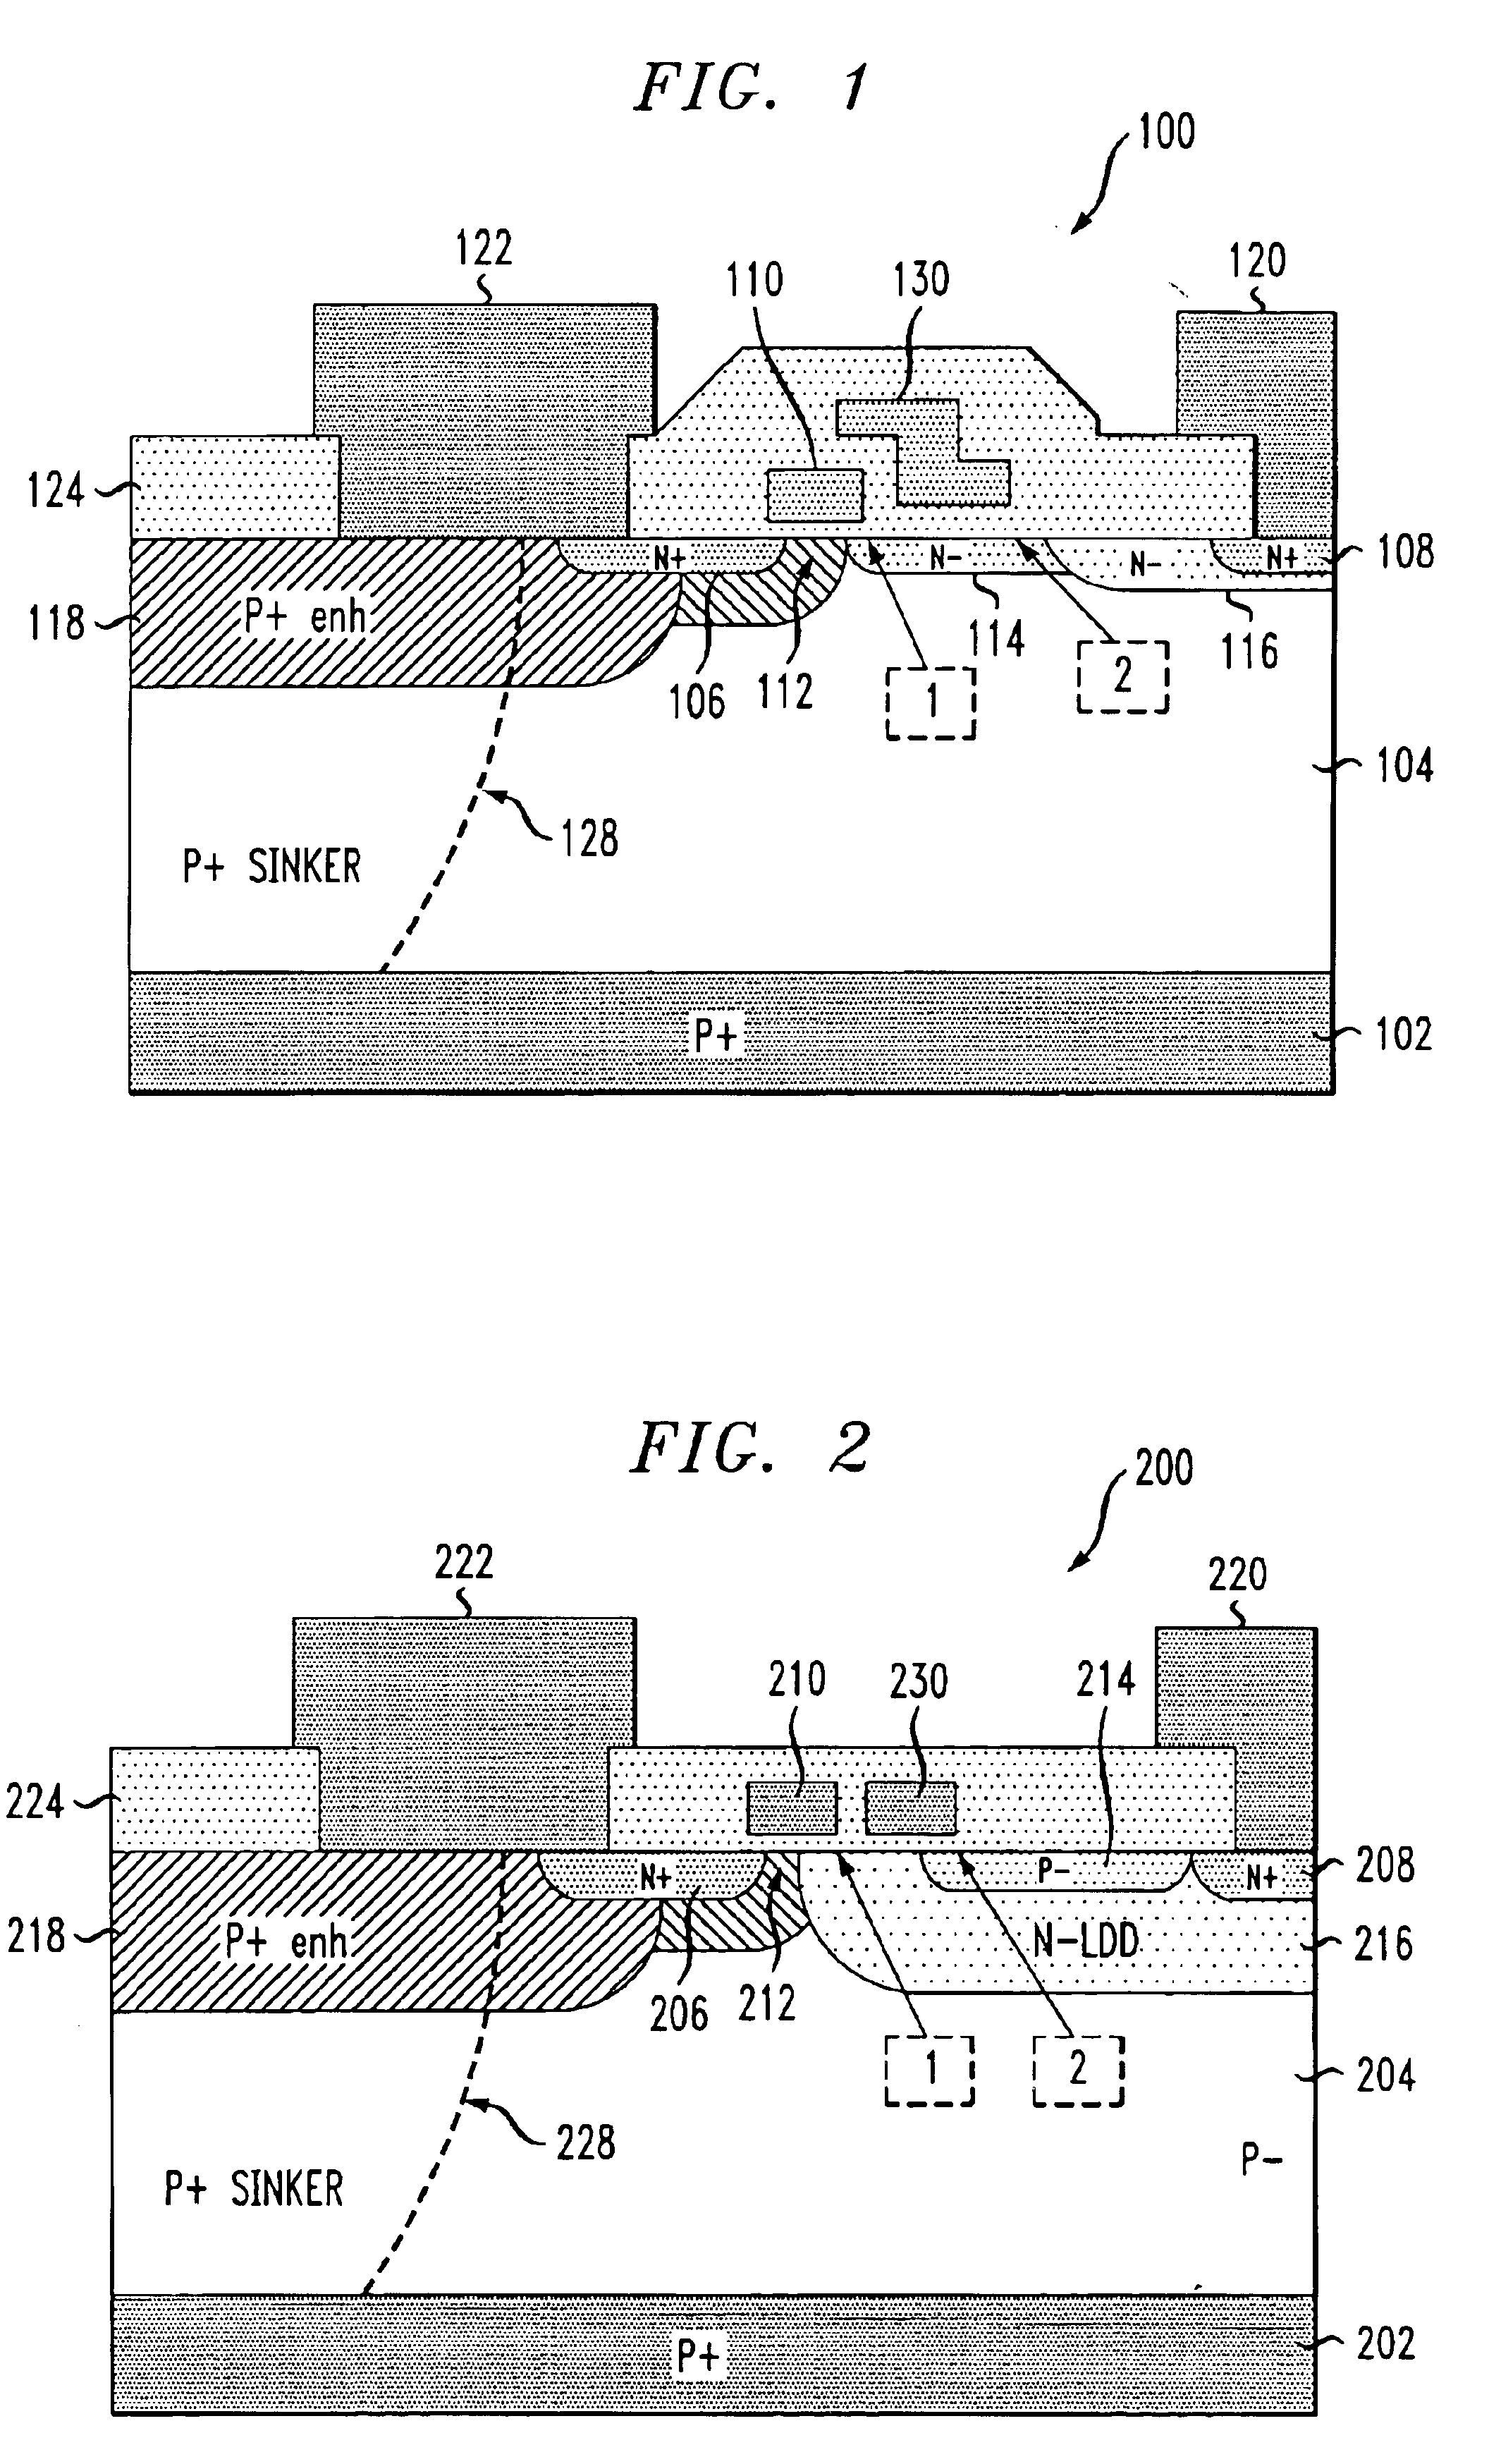 Metal-oxide-semiconductor device including a buried lightly-doped drain region